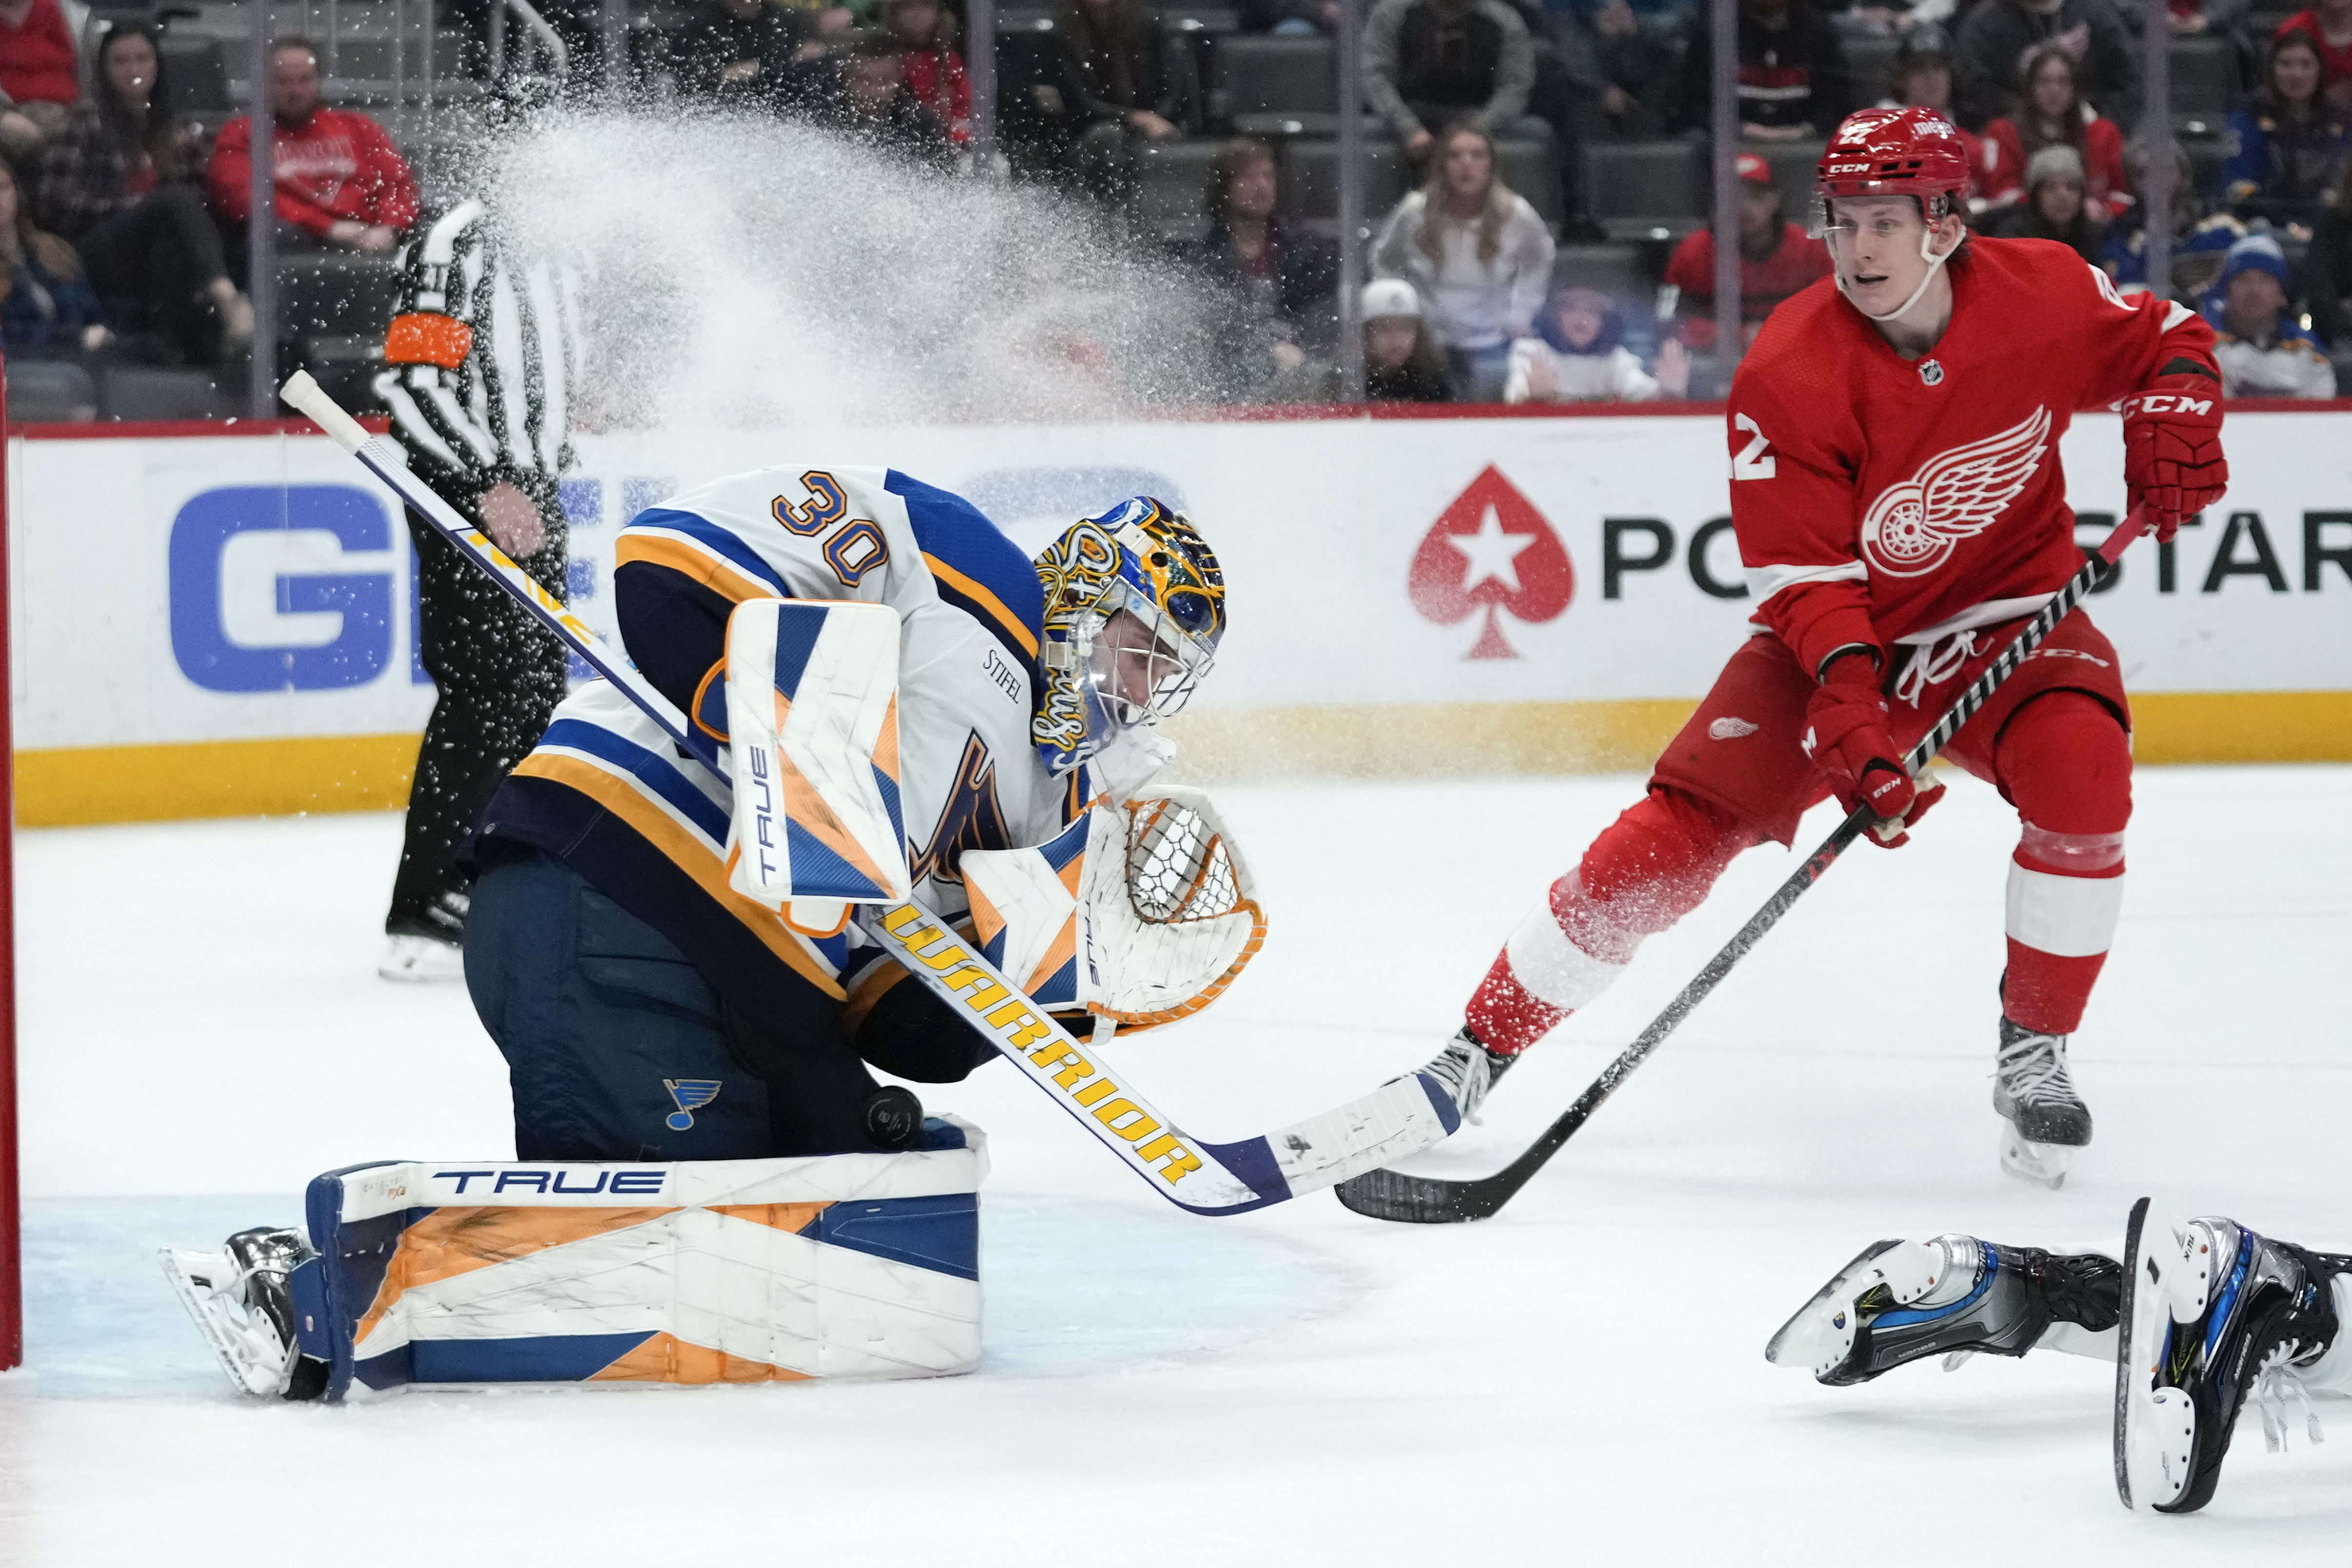 Colton Parayko deal gives Blues incredible value on young star